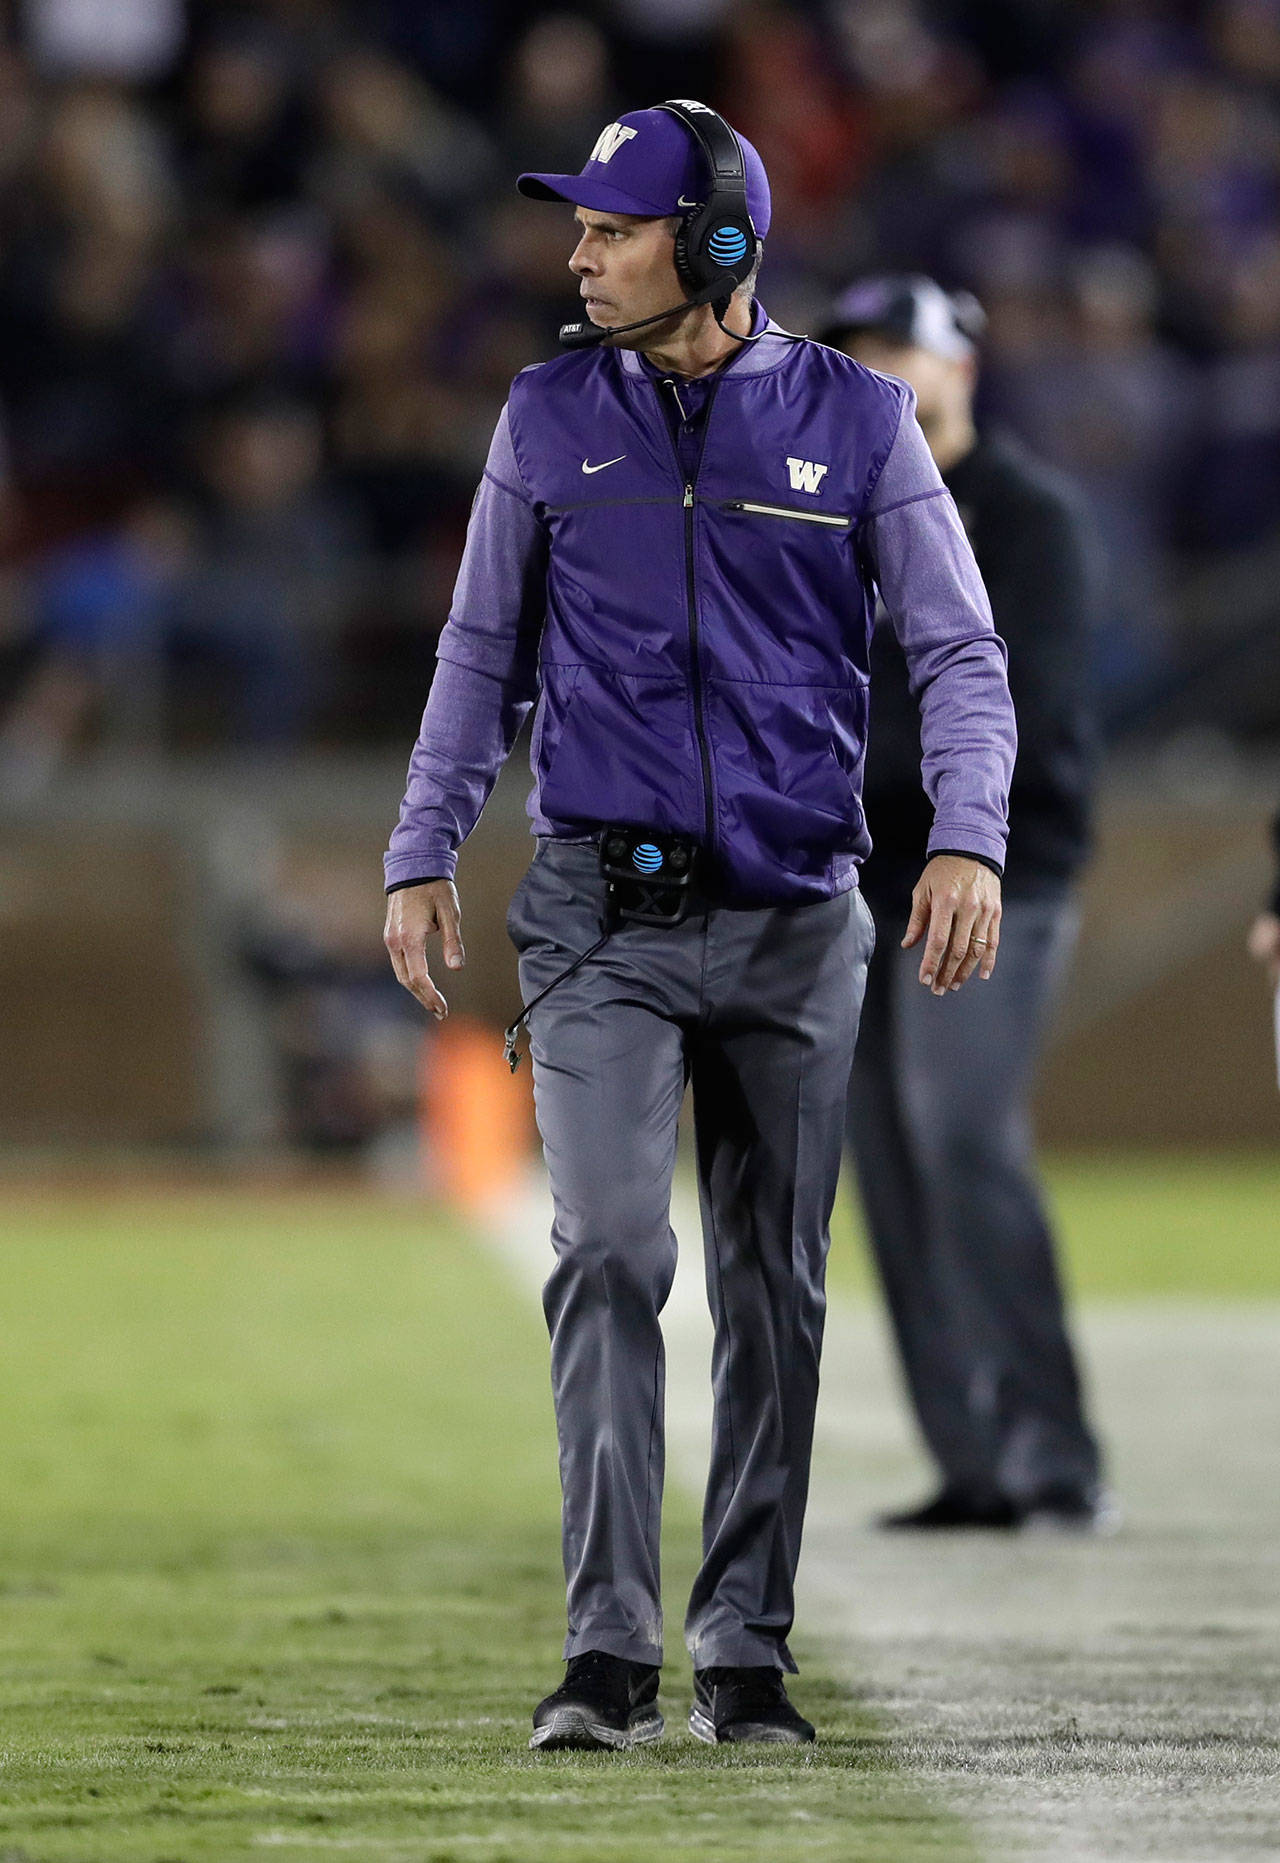 Washington head coach Chris Petersen walks the sideline during the first half of a game against Stanford on Nov. 10 in Stanford, California. (Associated Press/Marcio Jose Sanchez)